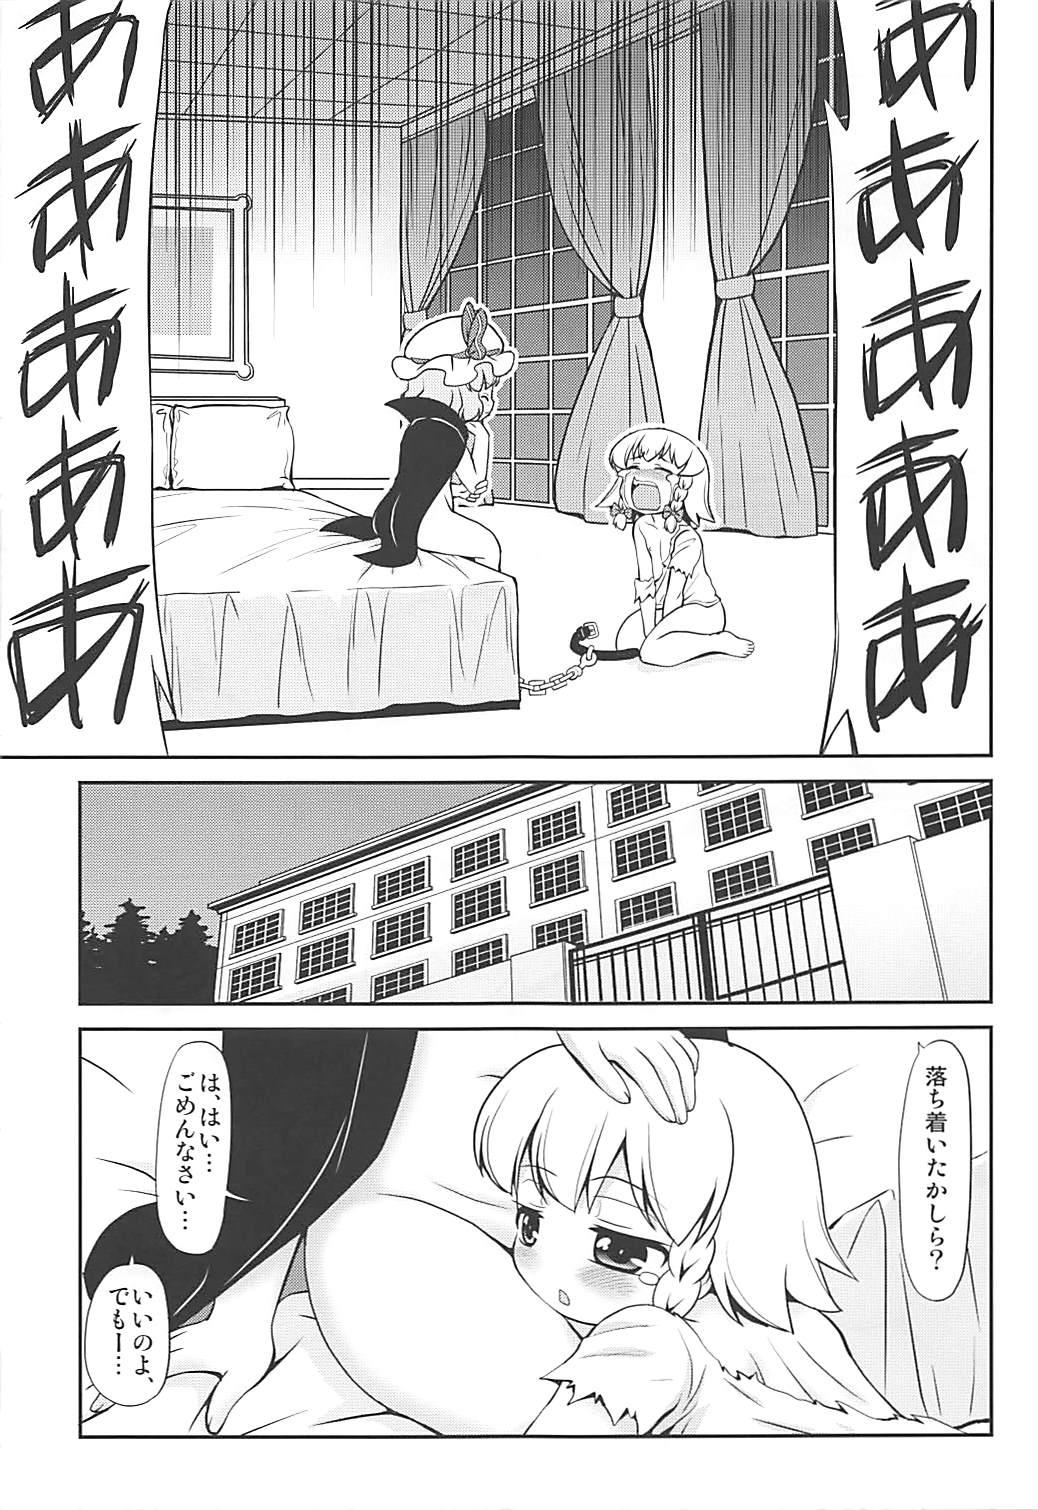 First Lealtad - Touhou project Workout - Page 8